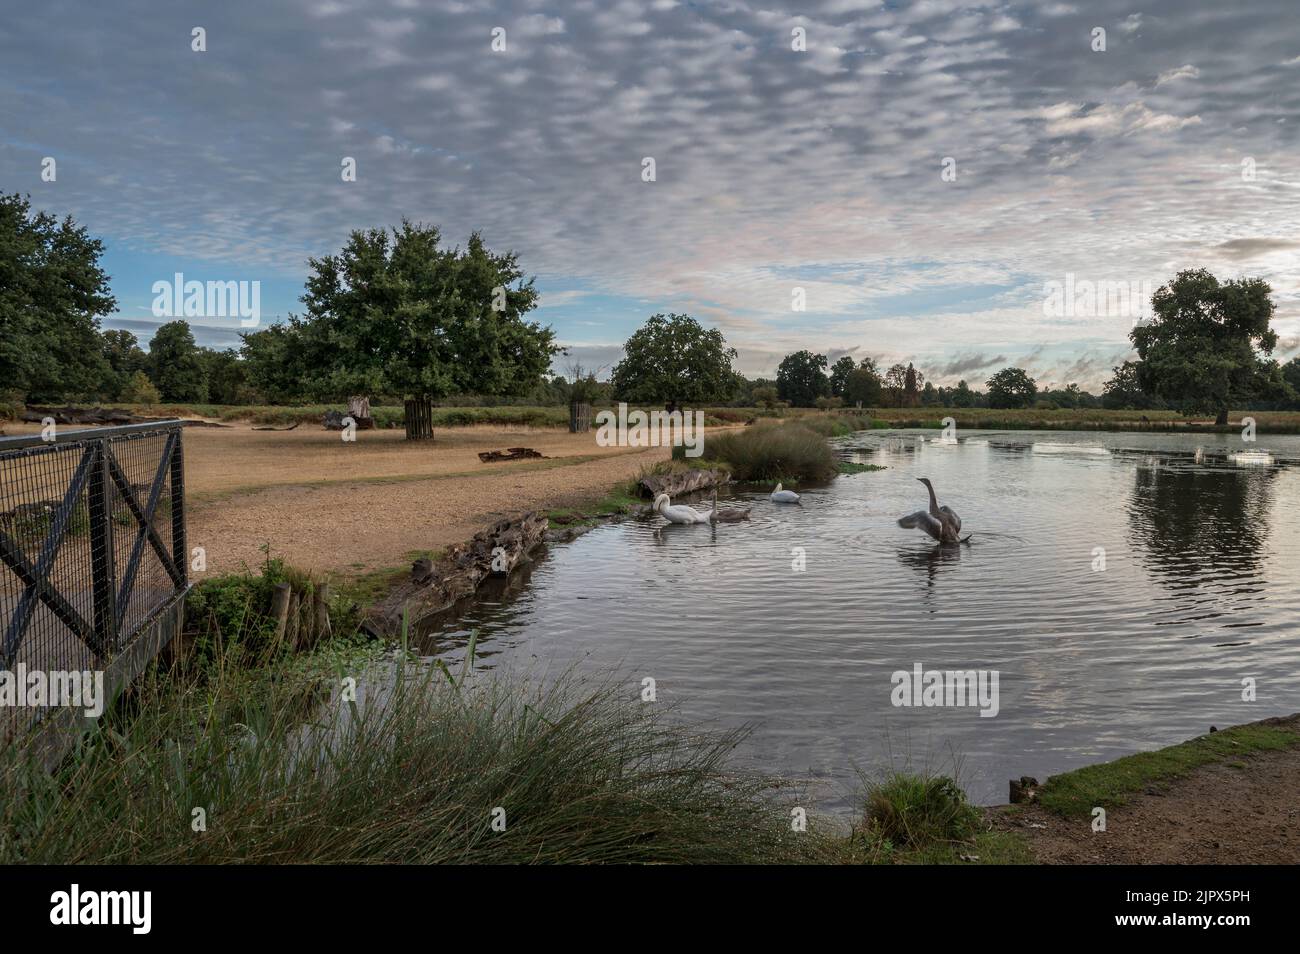 Family of swans at dawn on Bushy Park ponds Stock Photo